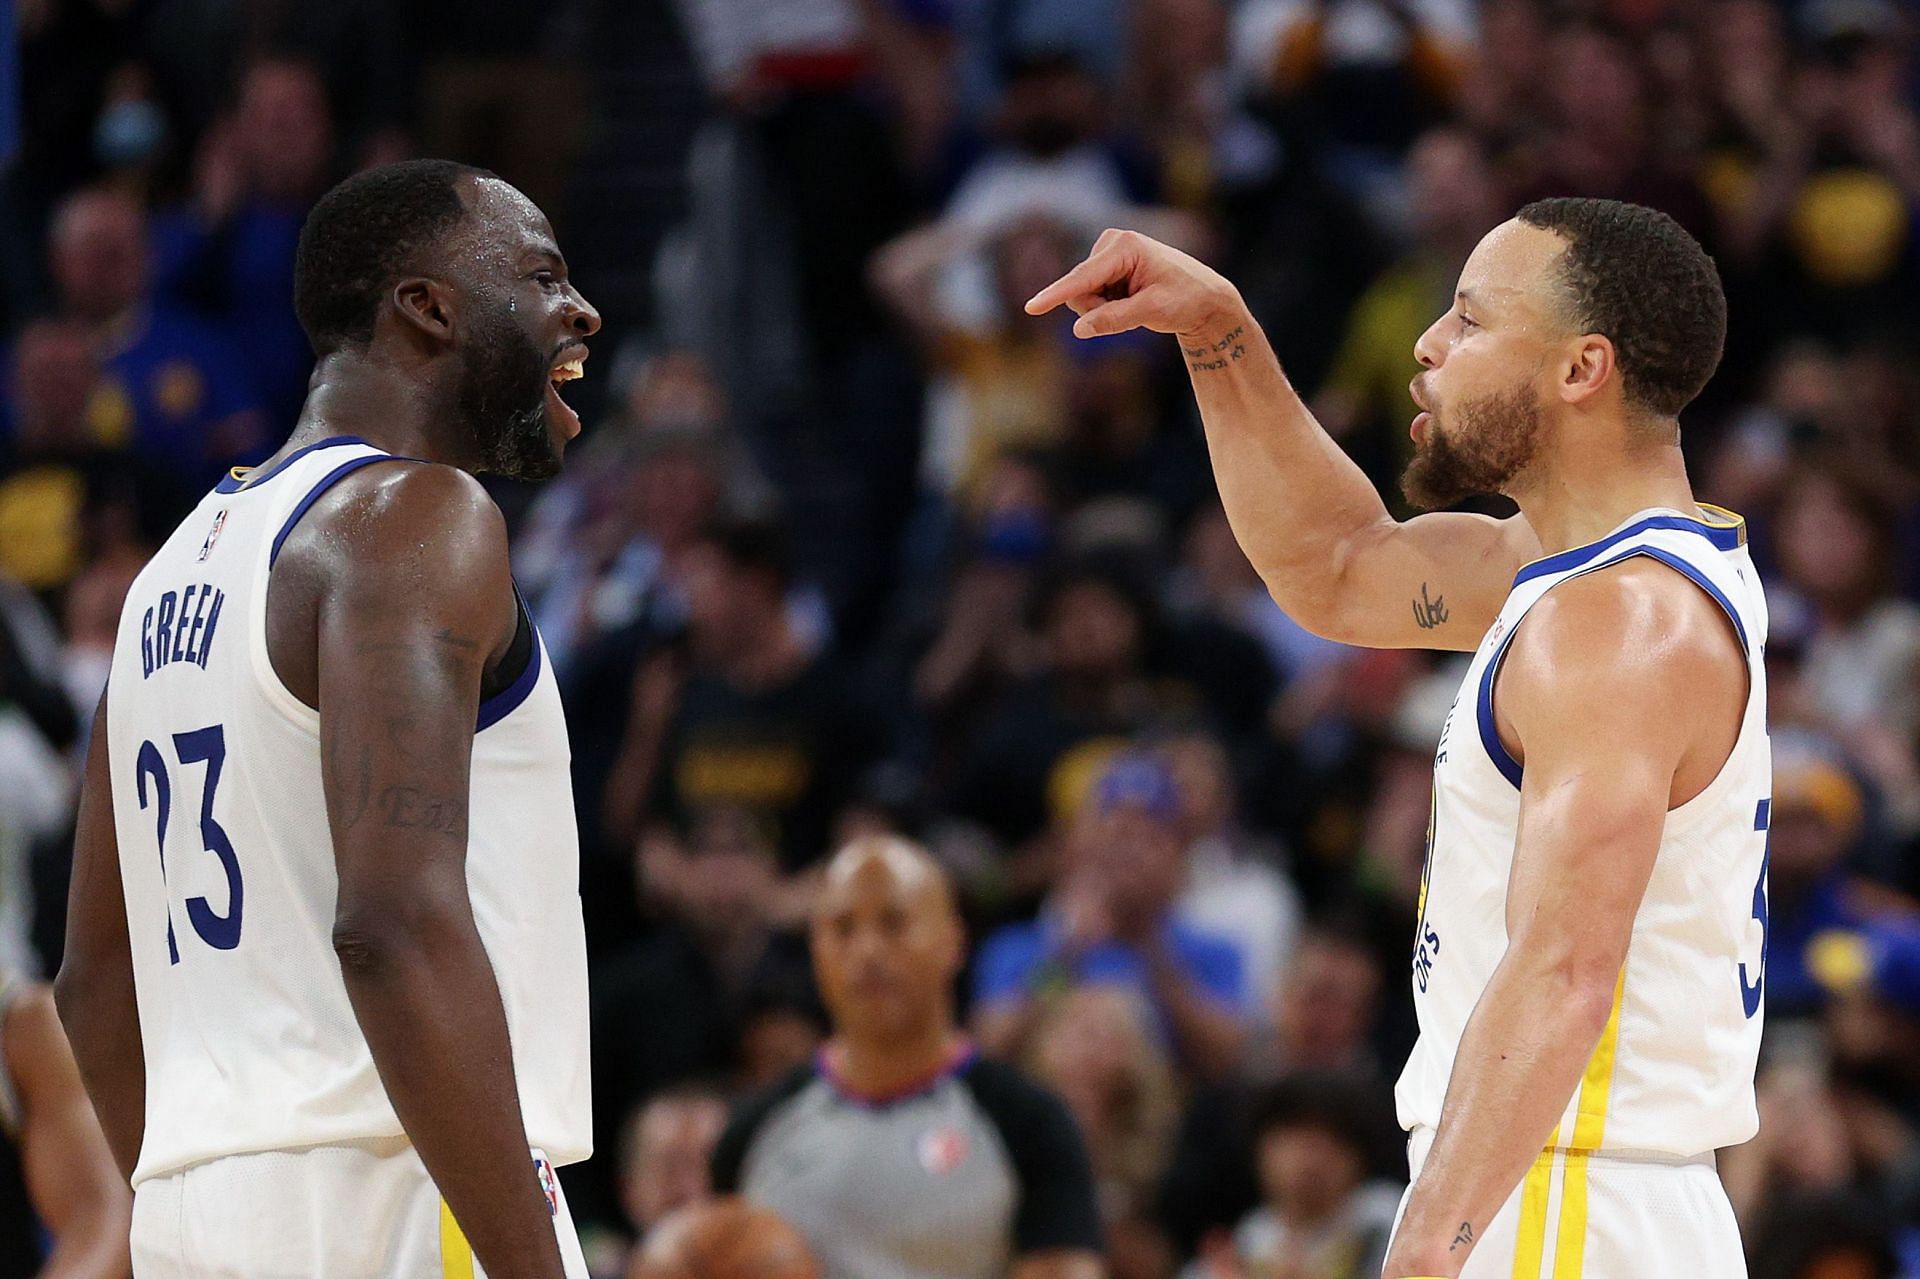 Draymond Green and Steph Curry of the Golden State Warriors